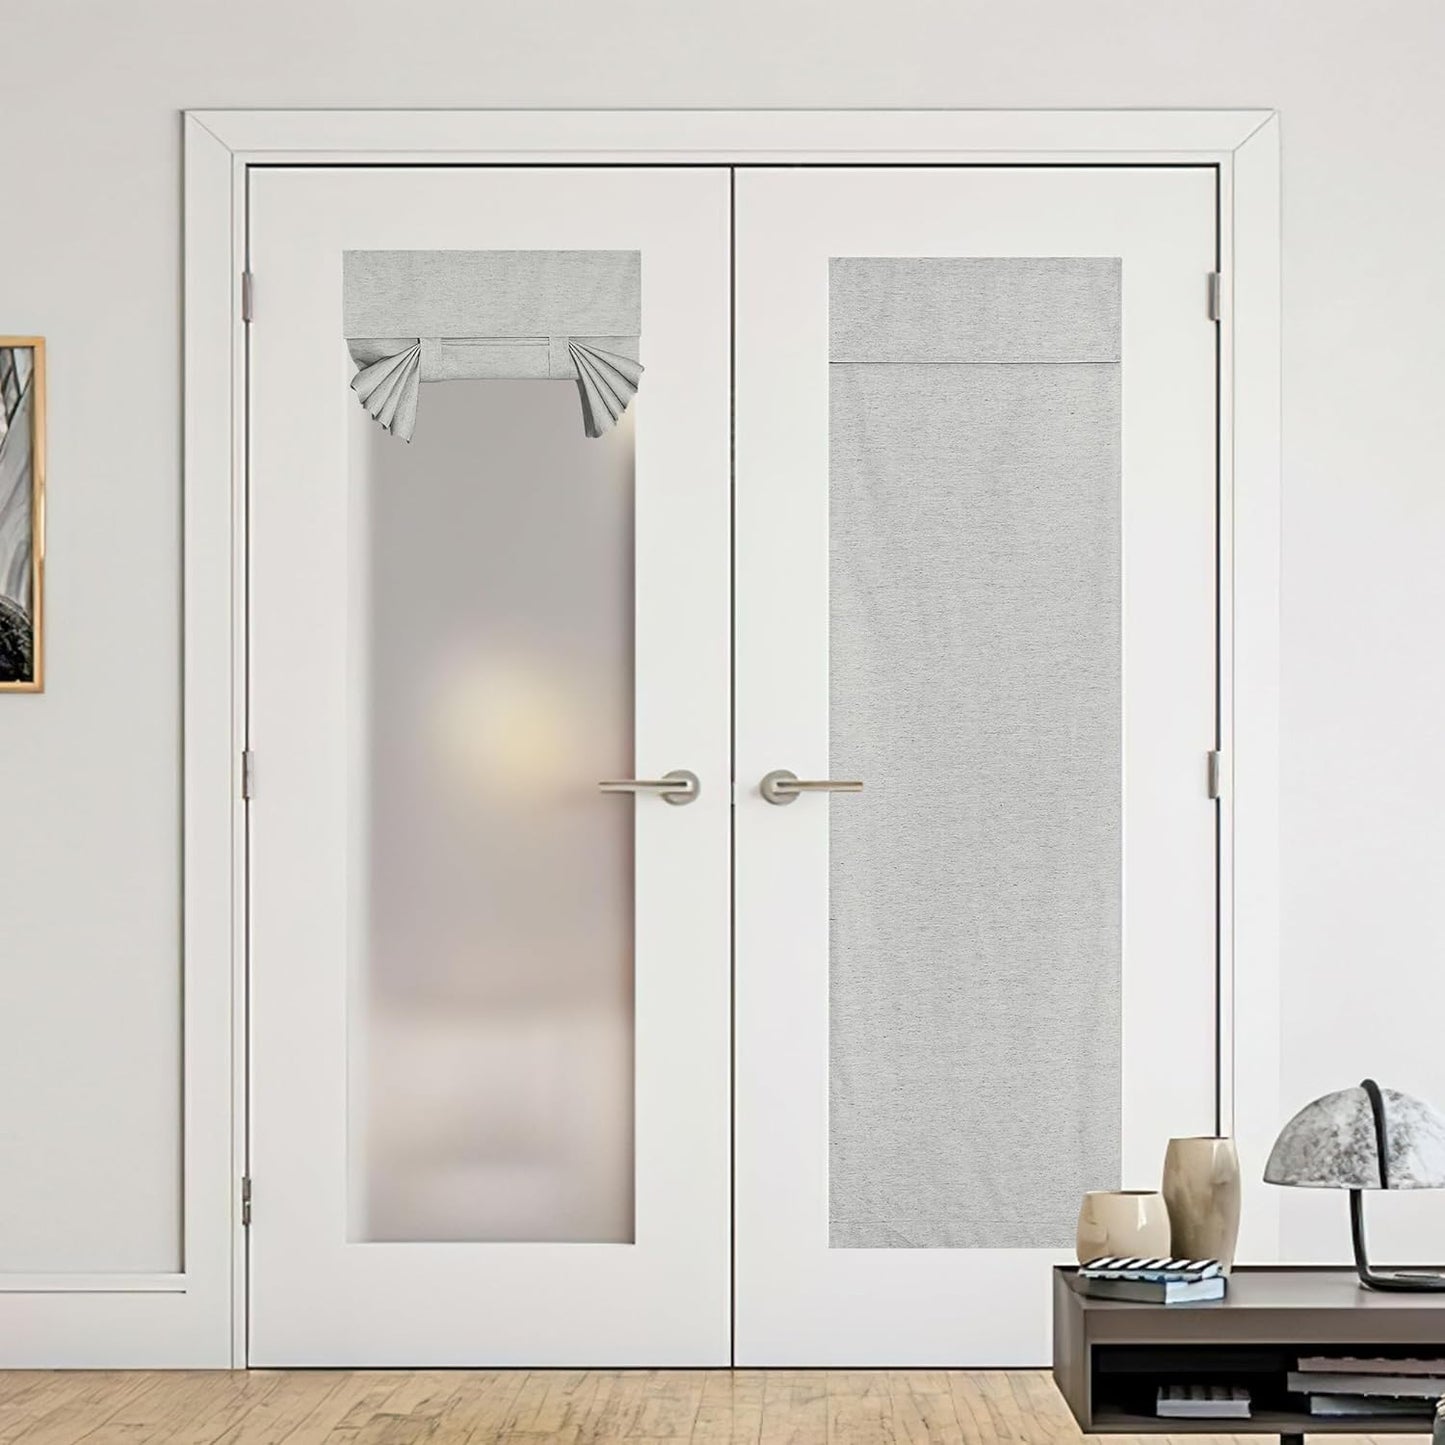 NICETOWN Linen Door Curtain for Door Window, Farmhouse French Door Curtain Shade for Kitchen Bathroom Energy Saving 100% Blackout Tie up Shade for Patio Sliding Glass, 1 Panel, Natural, 26" W X 72" L  NICETOWN Light Grey W36 X L72 